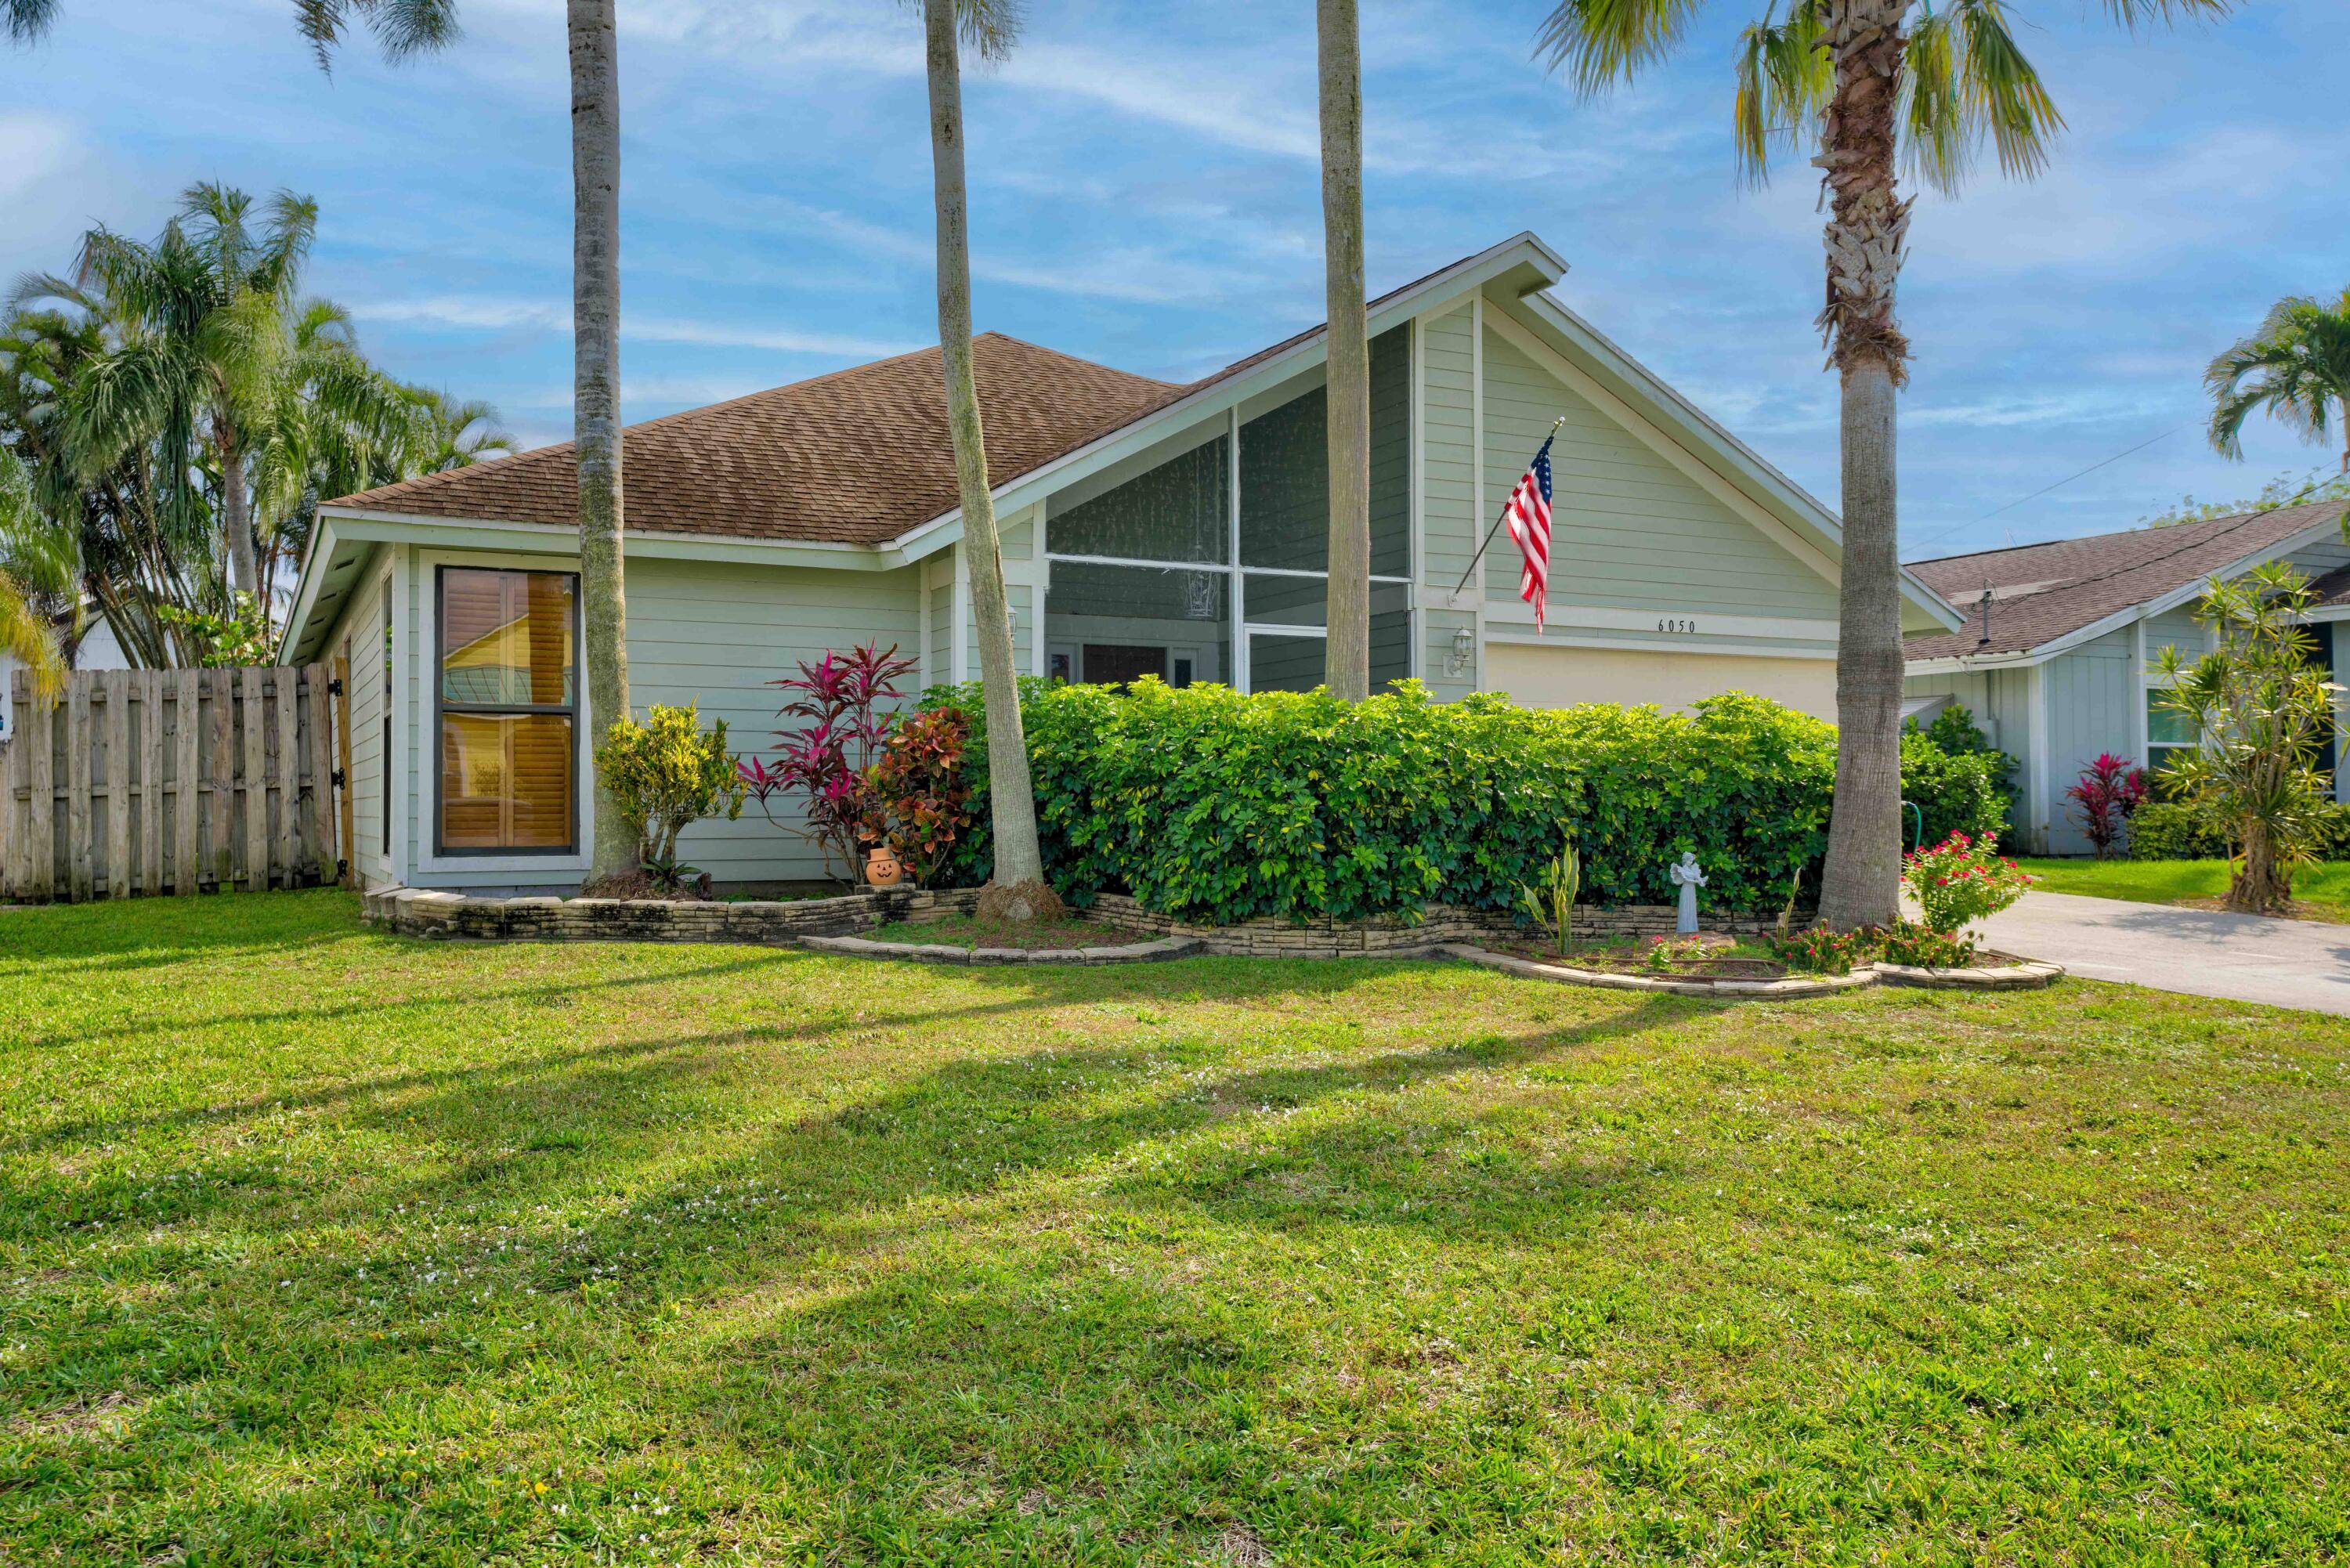 Calling all Buyers ! Don't miss the chance to enjoy the freedoms of a beautiful, neighborly, non HOA community conveniently located in the desirable North Palm Beach Heights of Jupiter ...